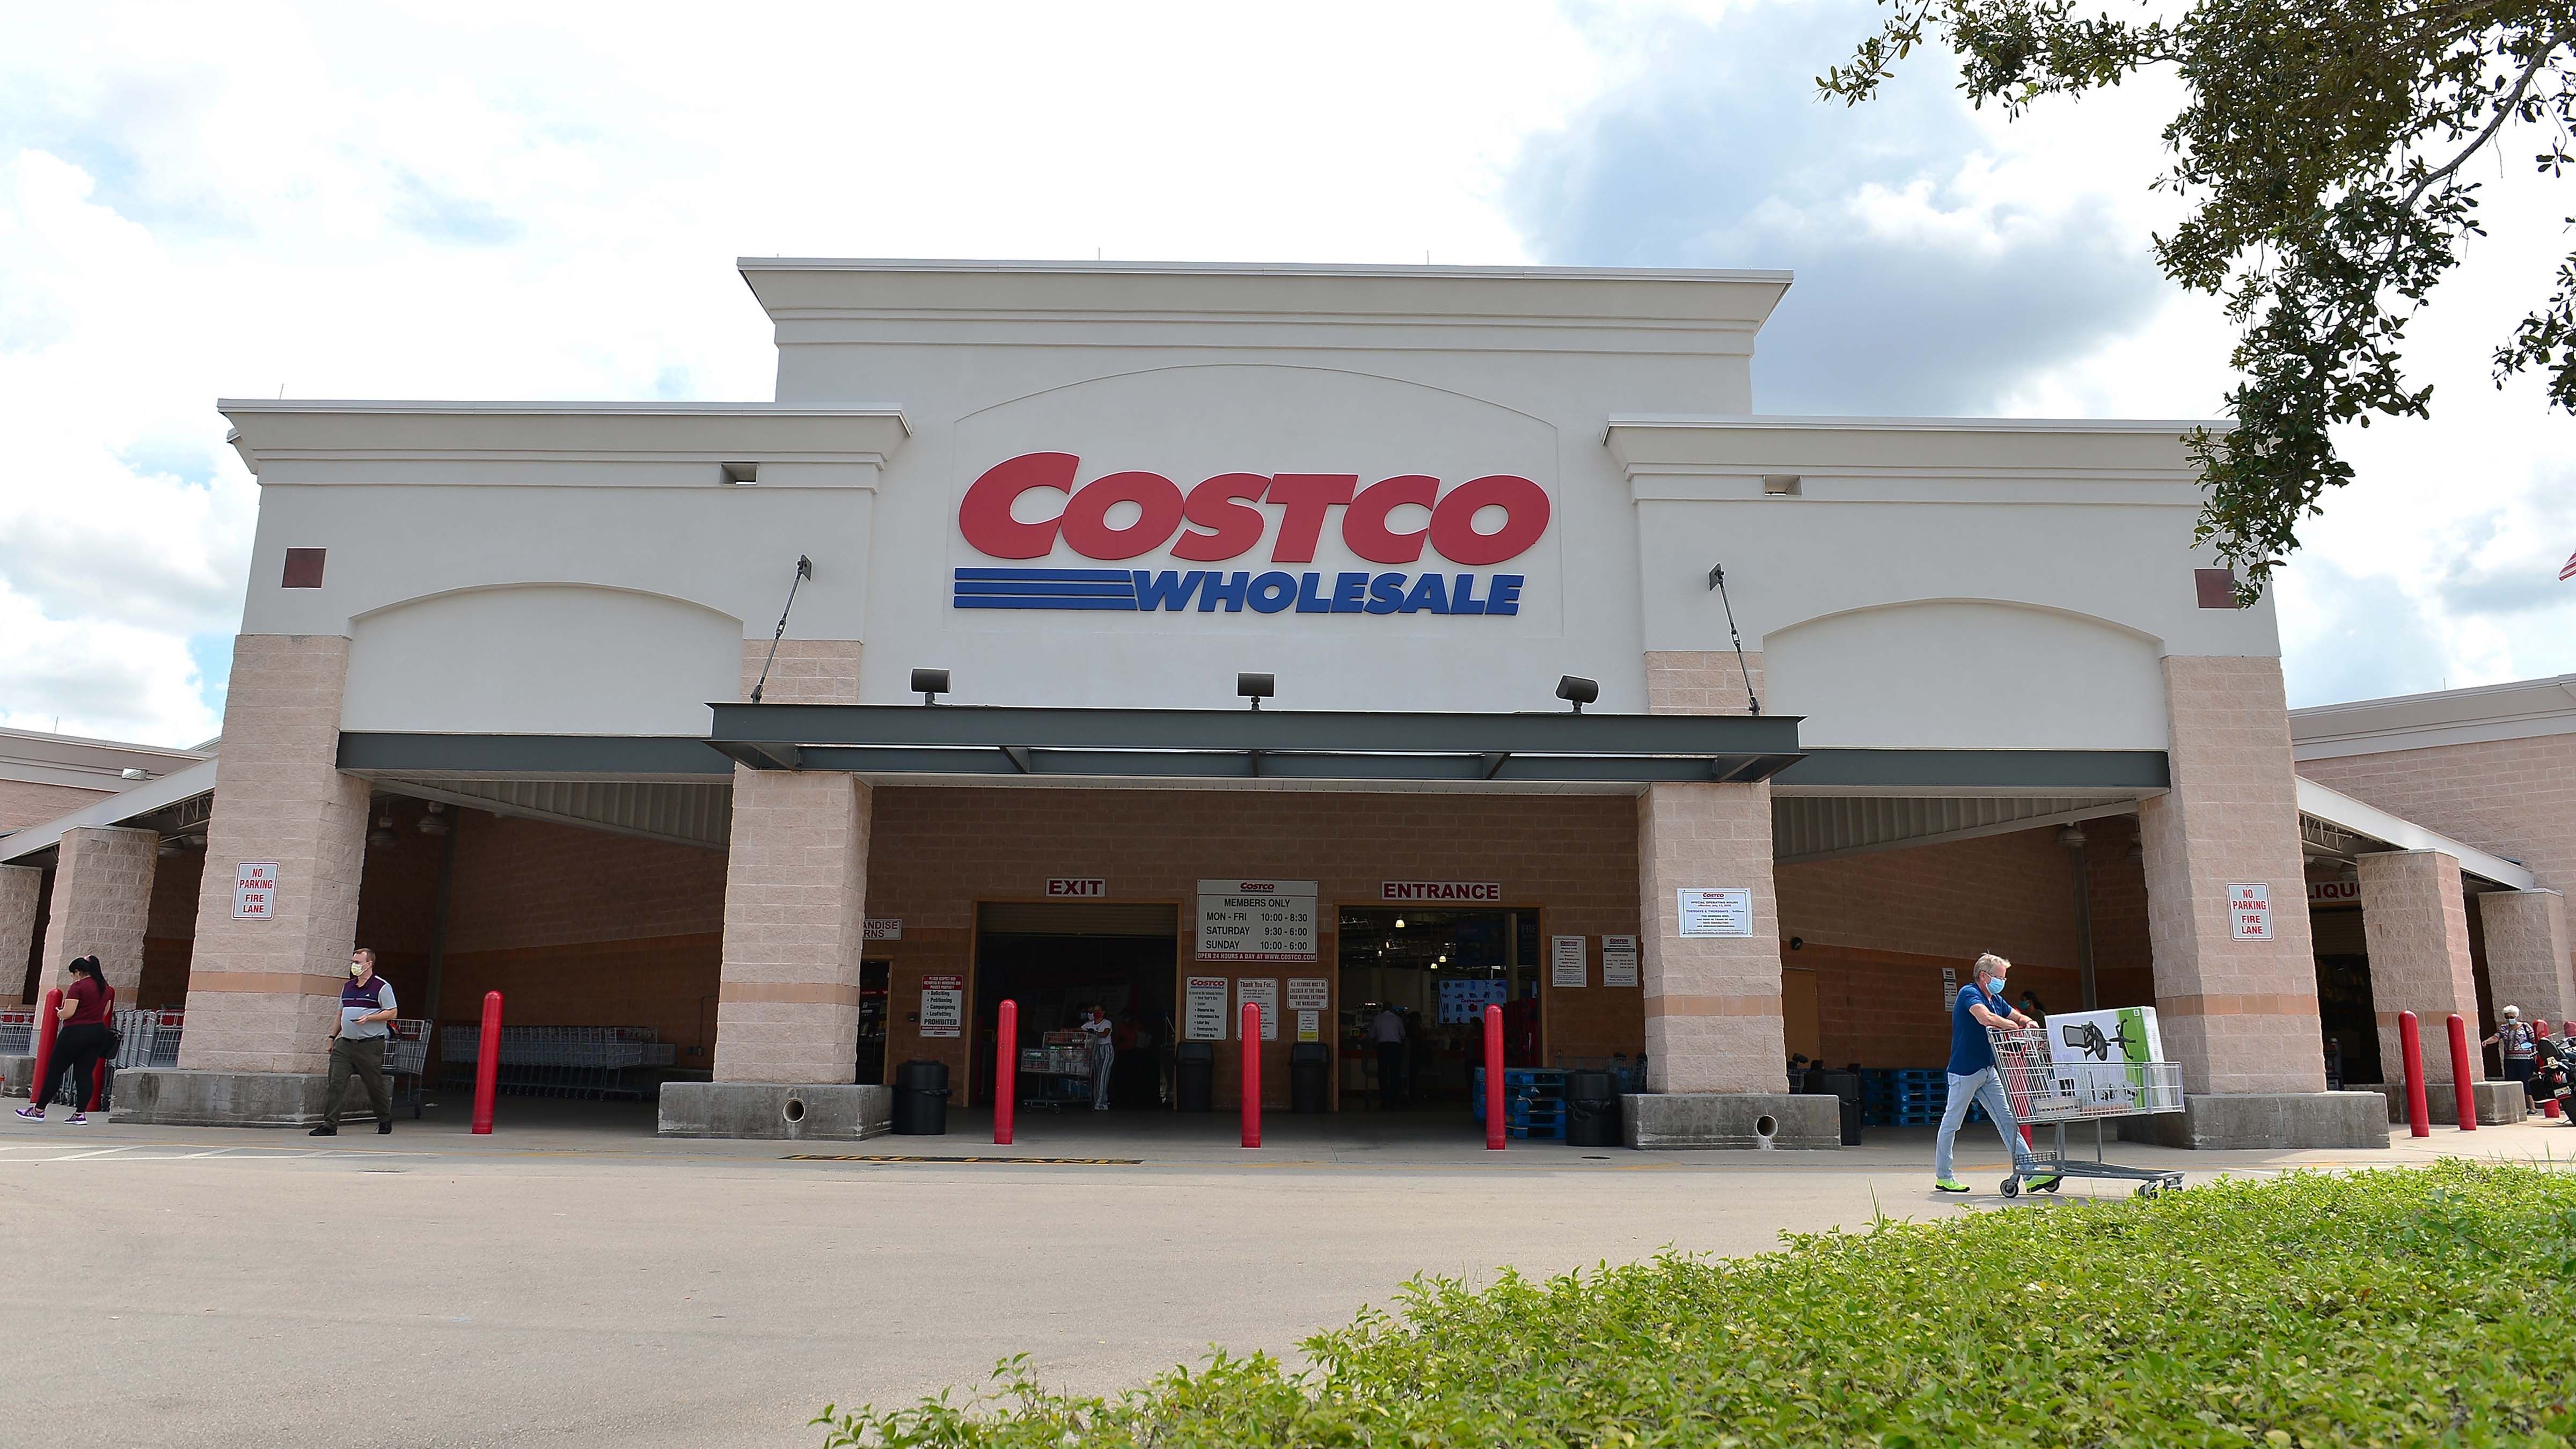 This Is the Best Day and Time To Avoid Crowds at Costco